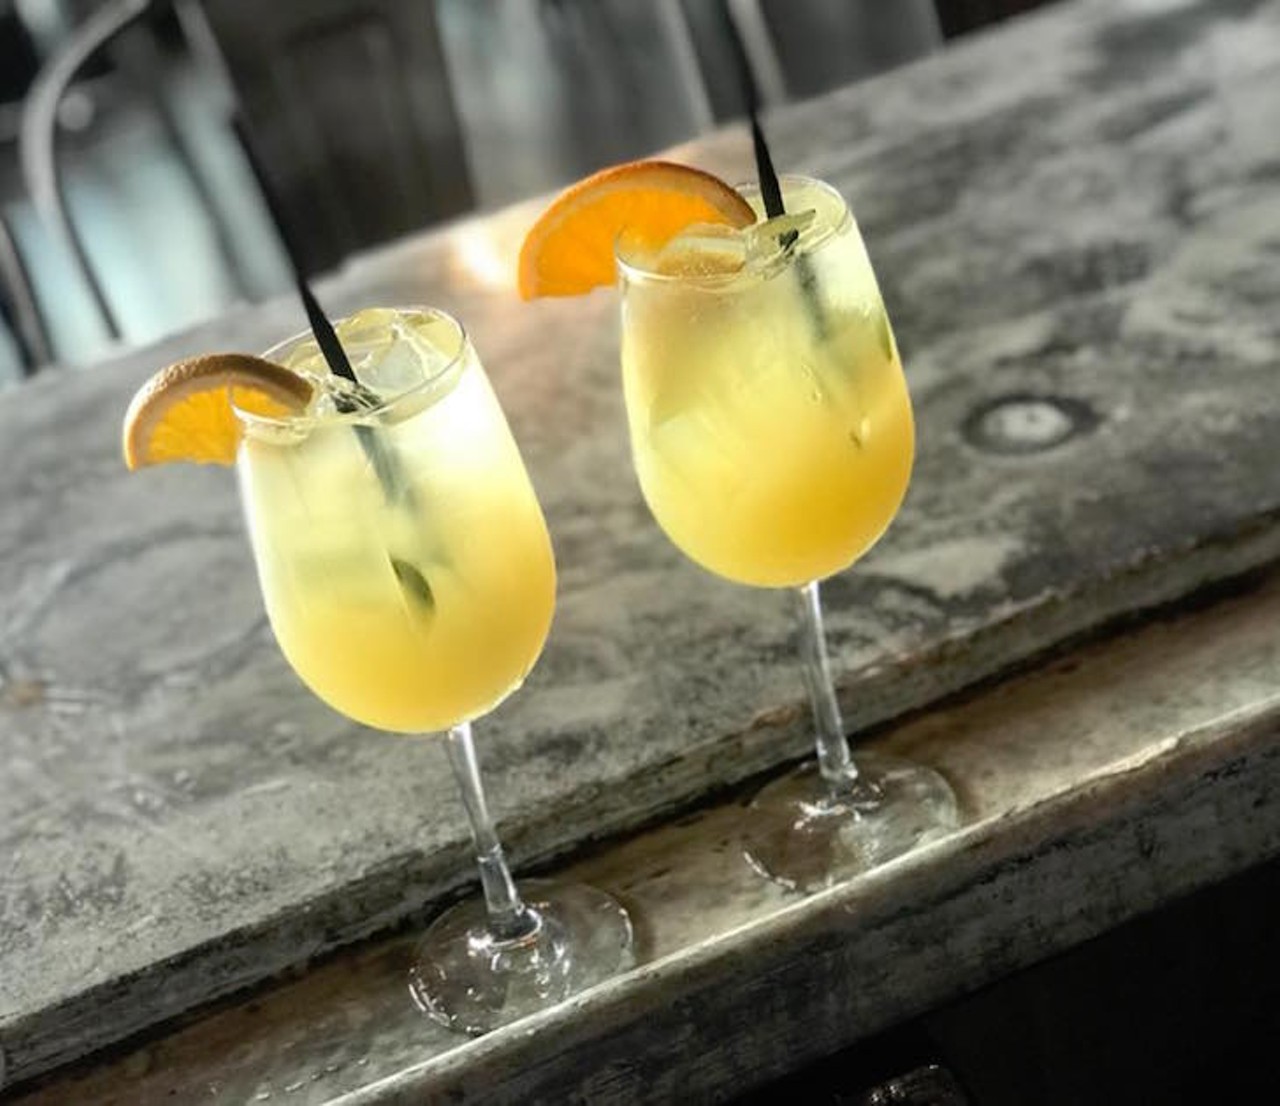 The Stubborn Mule
100 S Eola Drive | (407) 930-1166
With the purchase of a starter or brunch entree the mimosas are $13 and bottomless as long as you follow the rules - literally. On Saturdays and Sundays from 11 a.m. to 2:30 p.m. this local brunch spot comes with a list of a few early morning faux pas.  
Photo via The Stubborn Mule/Facebook